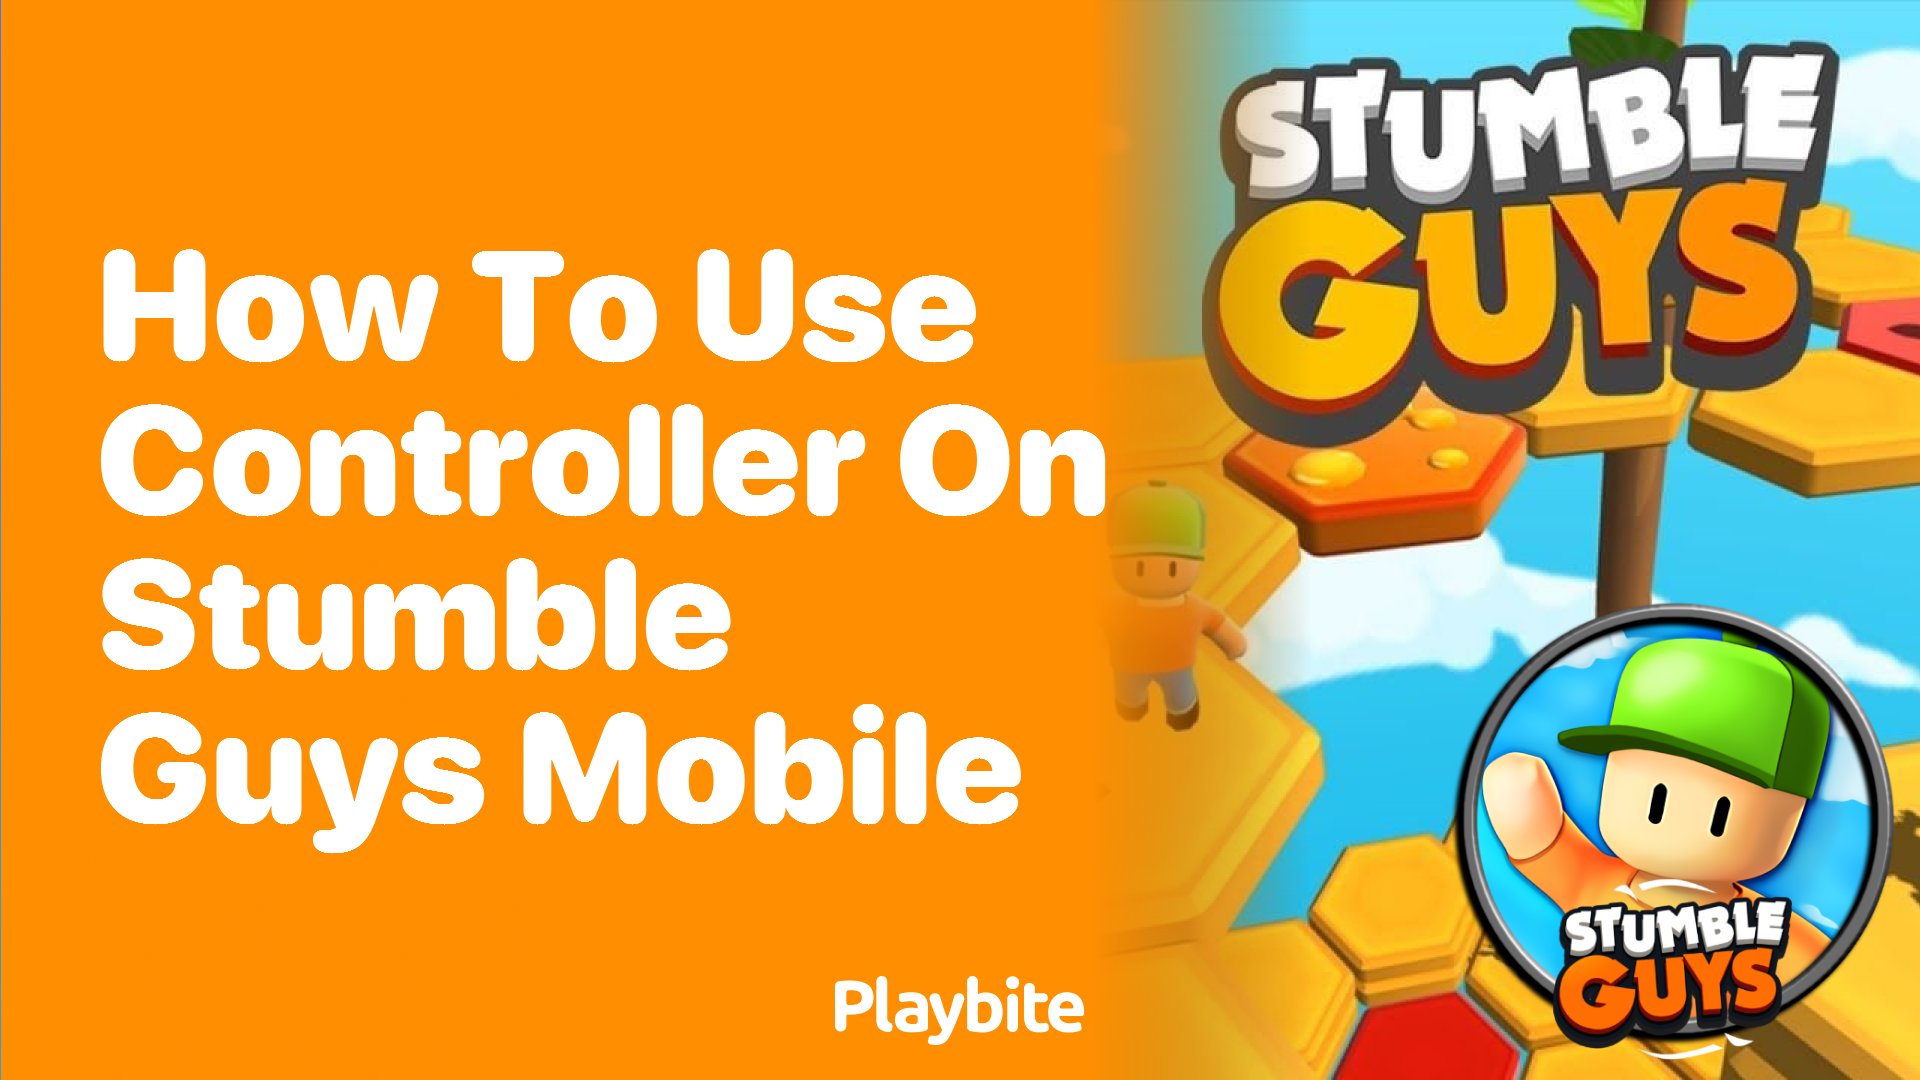 How to Use a Controller on Stumble Guys Mobile